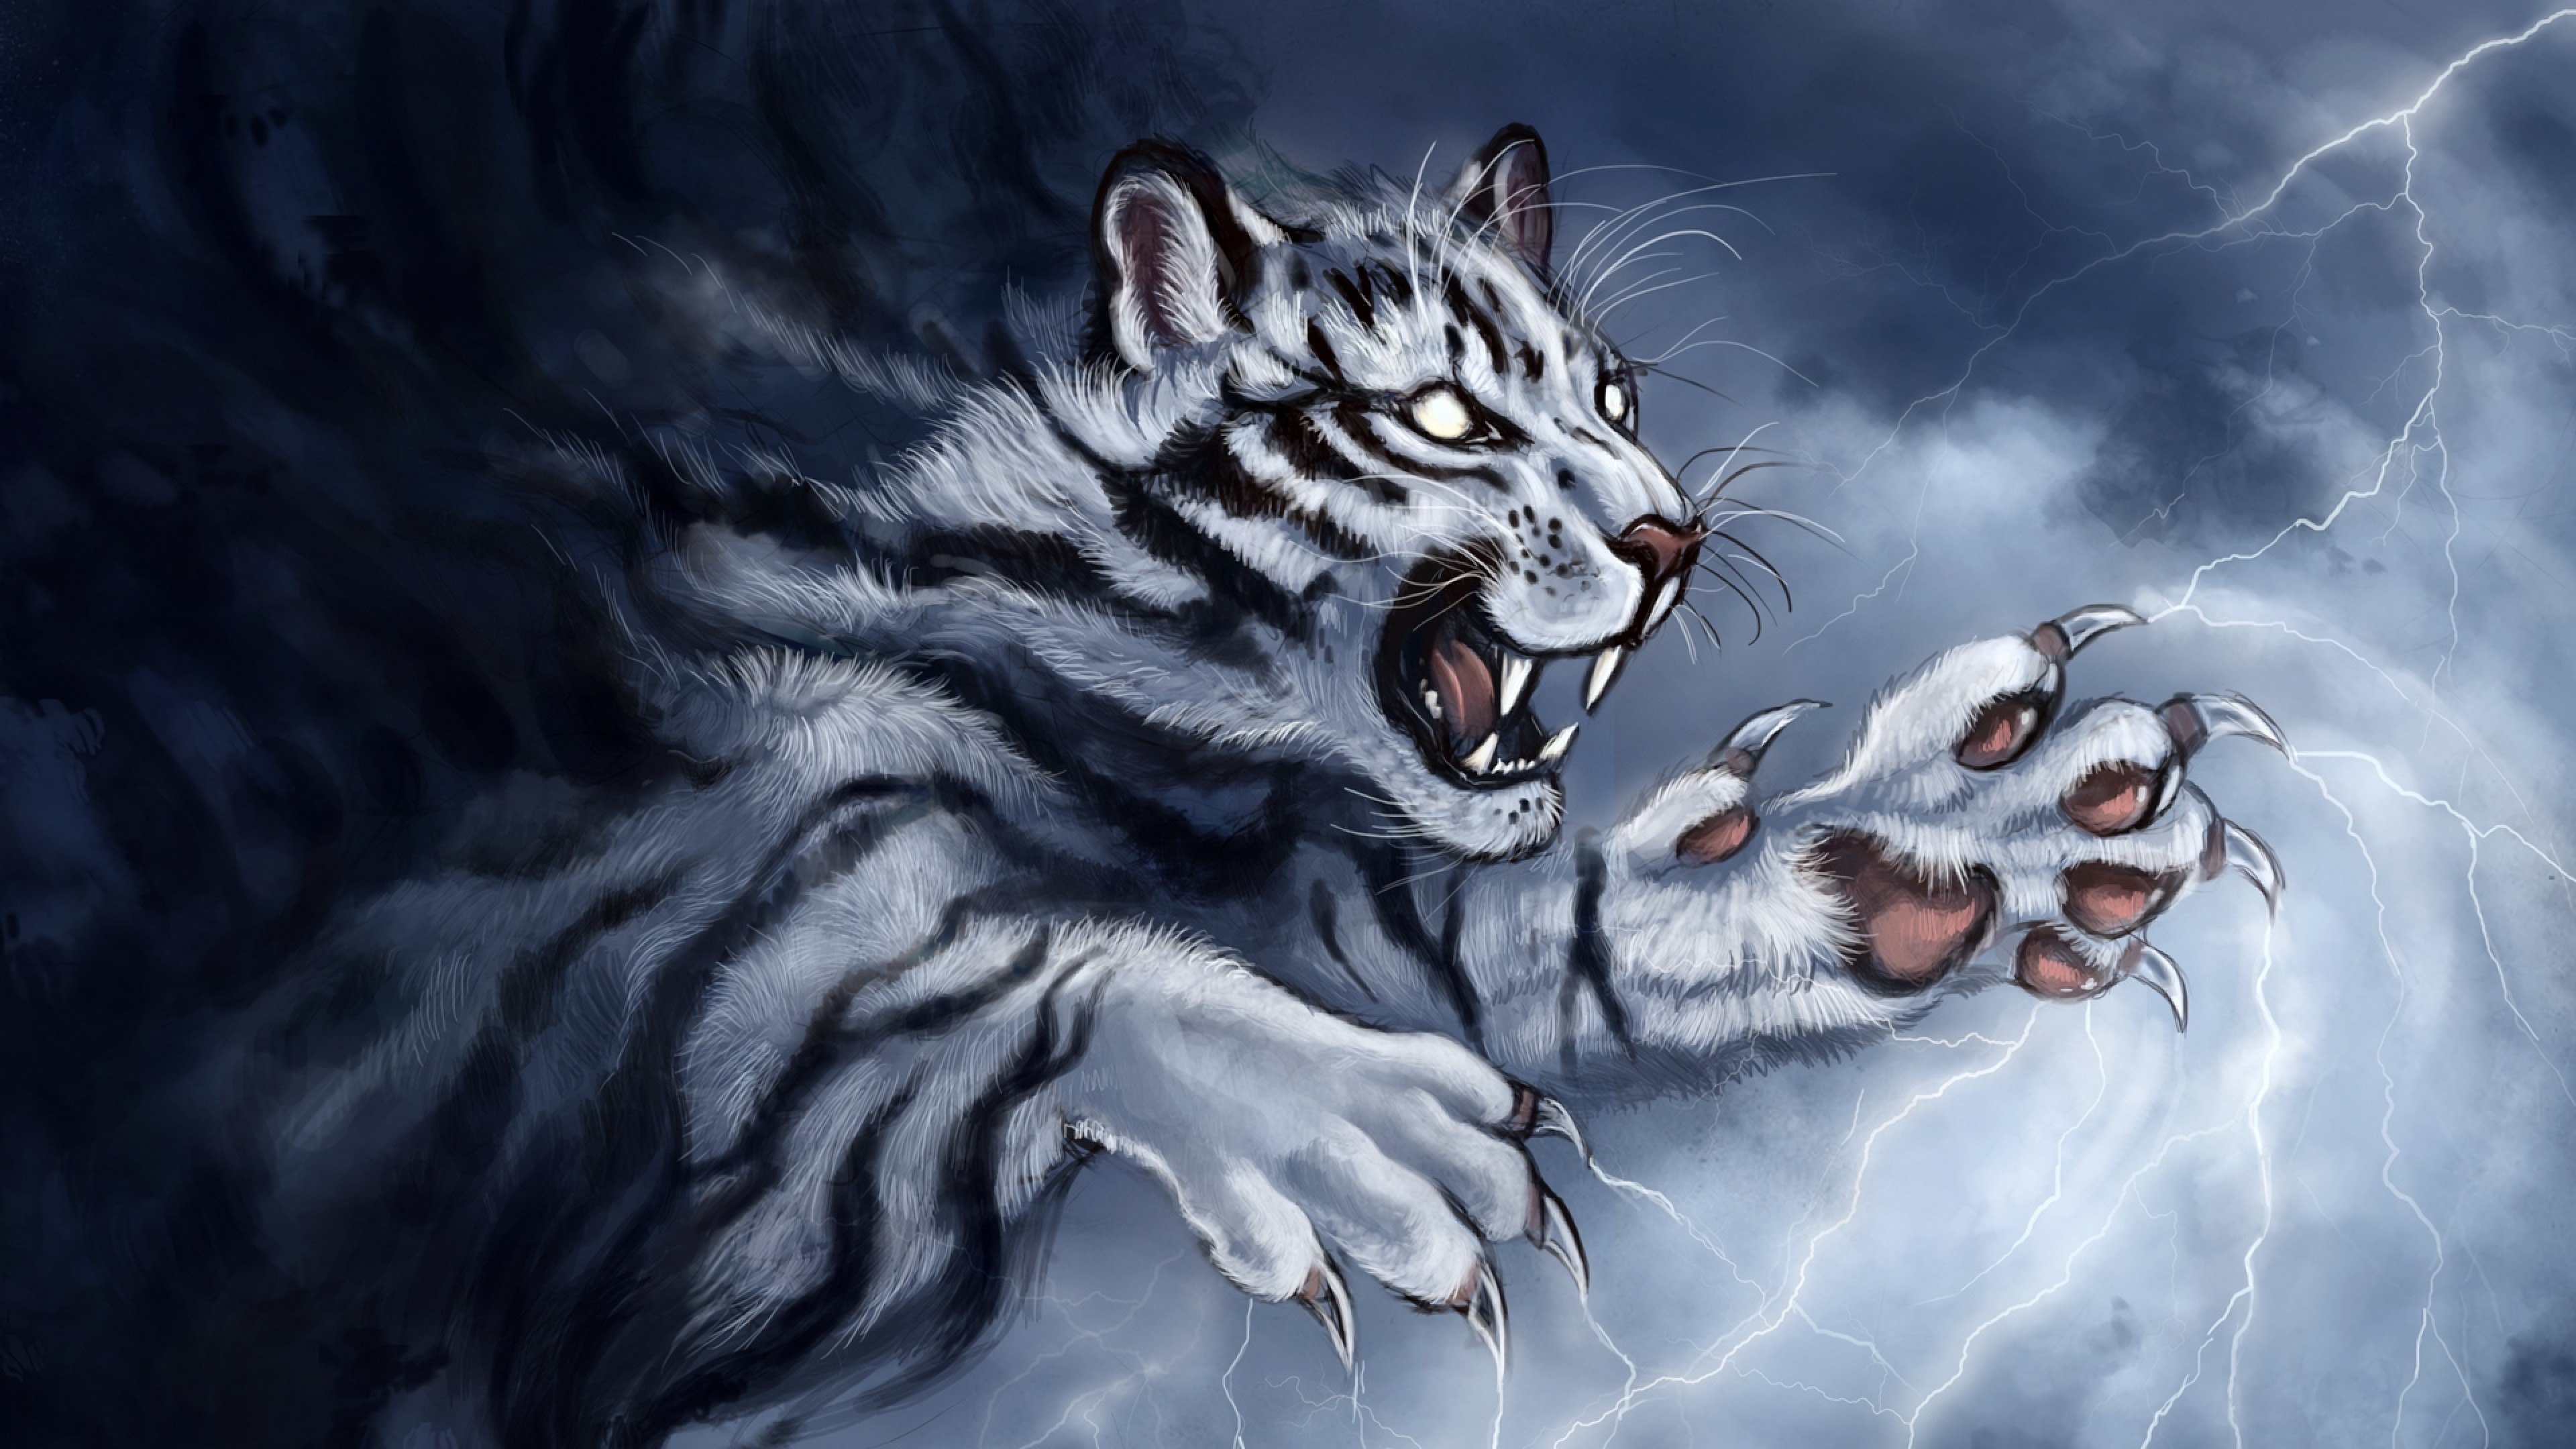 Animated tiger HD Wallpapers 4K Ultra HD